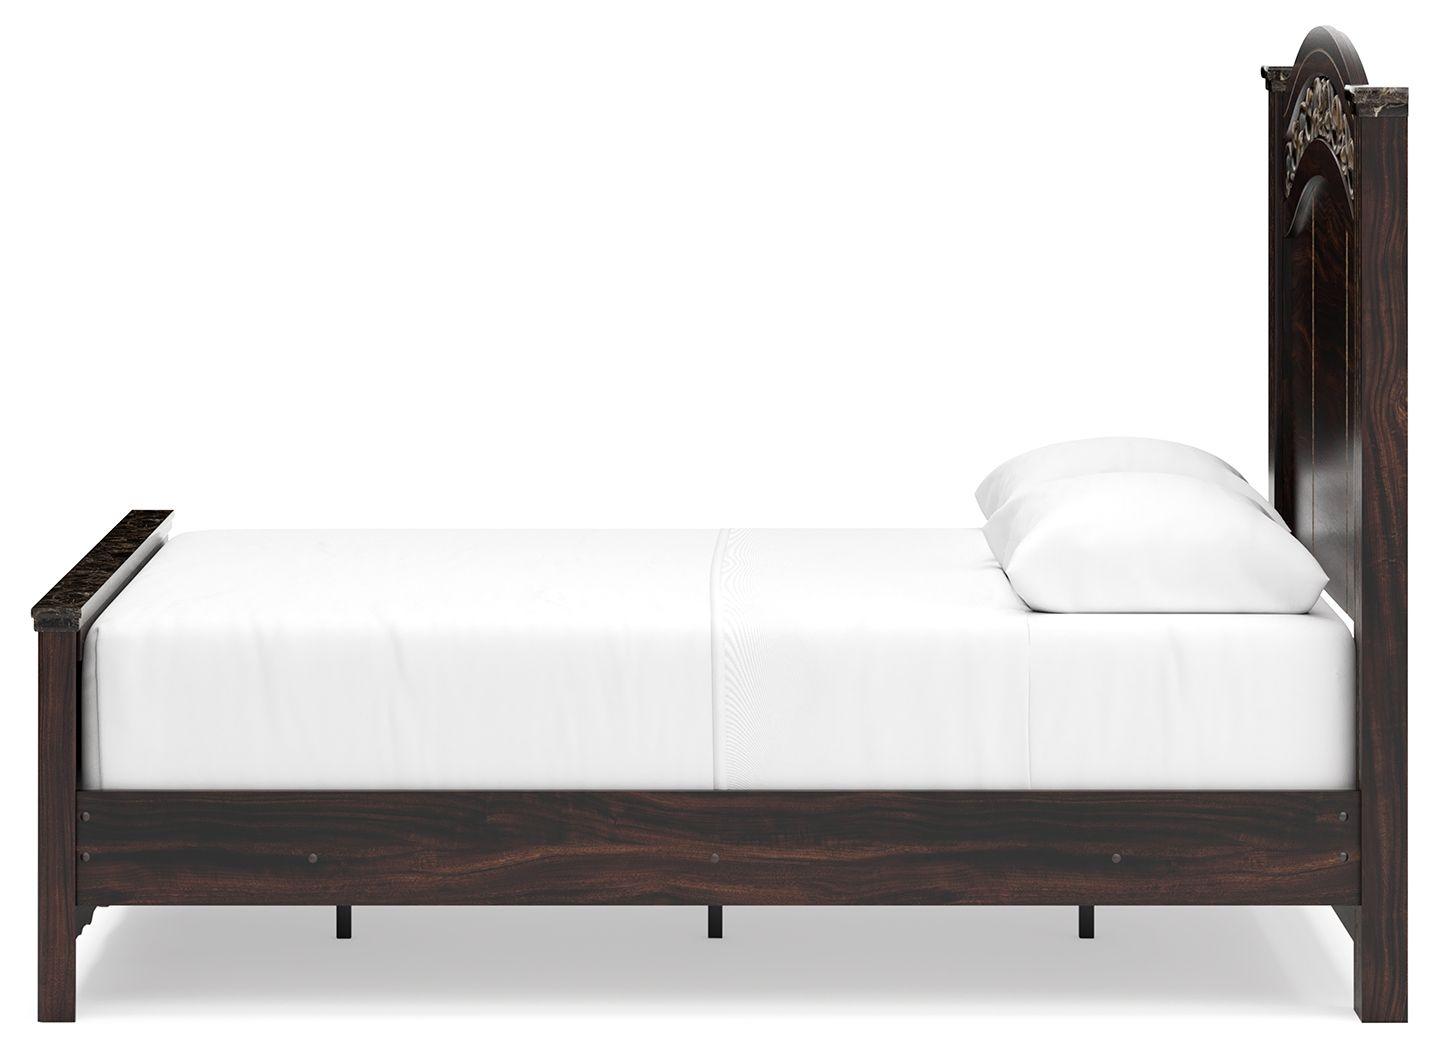 Signature Design by Ashley® - Glosmount - Poster Bed - 5th Avenue Furniture